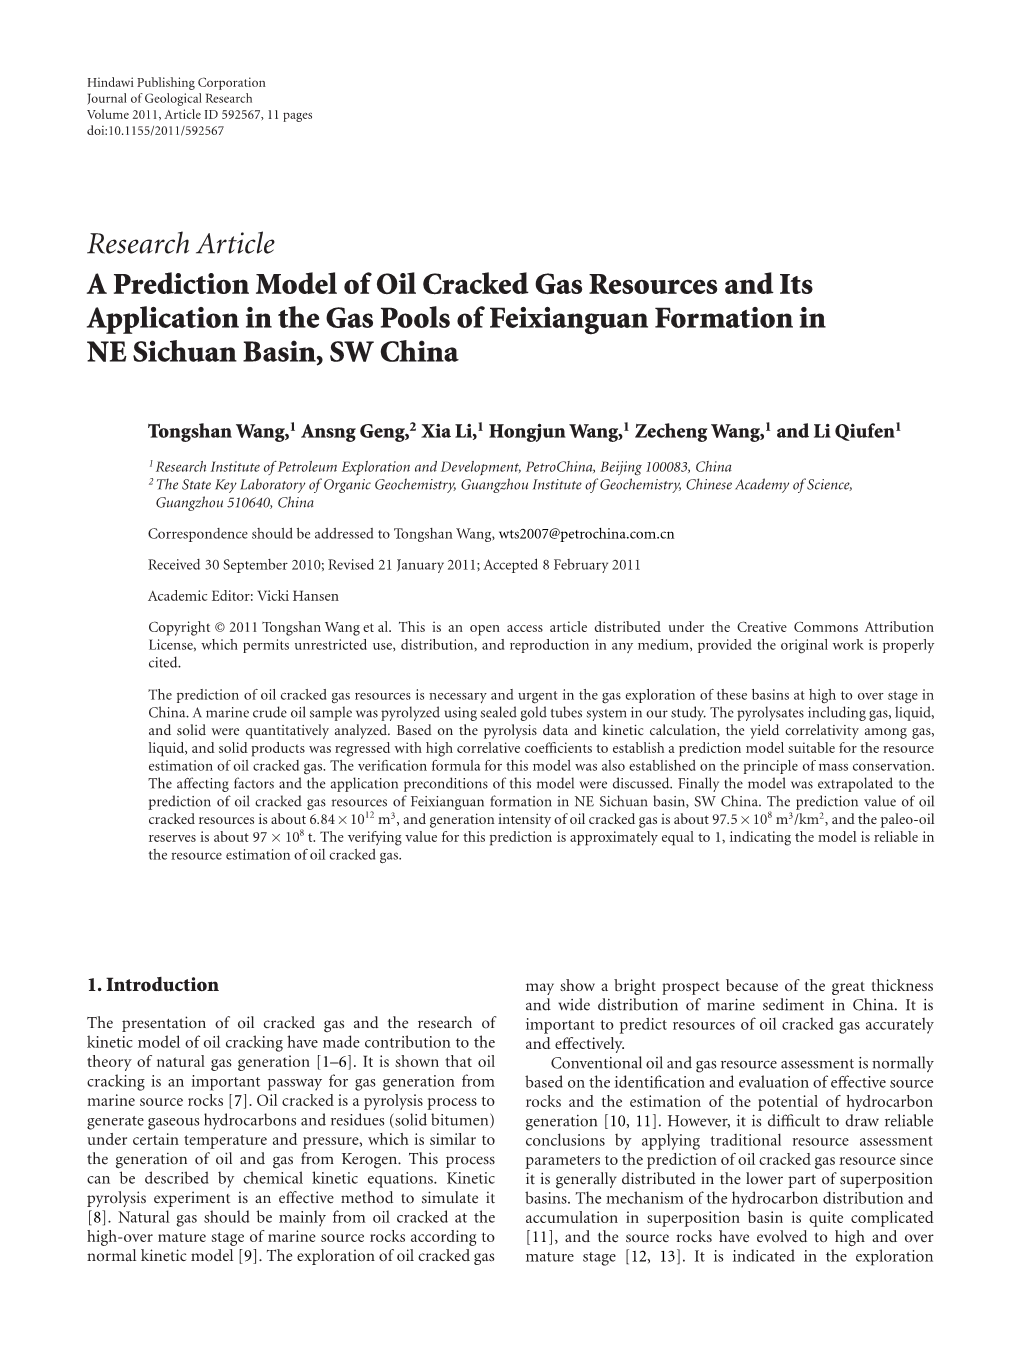 A Prediction Model of Oil Cracked Gas Resources and Its Application in the Gas Pools of Feixianguan Formation in NE Sichuan Basin, SW China